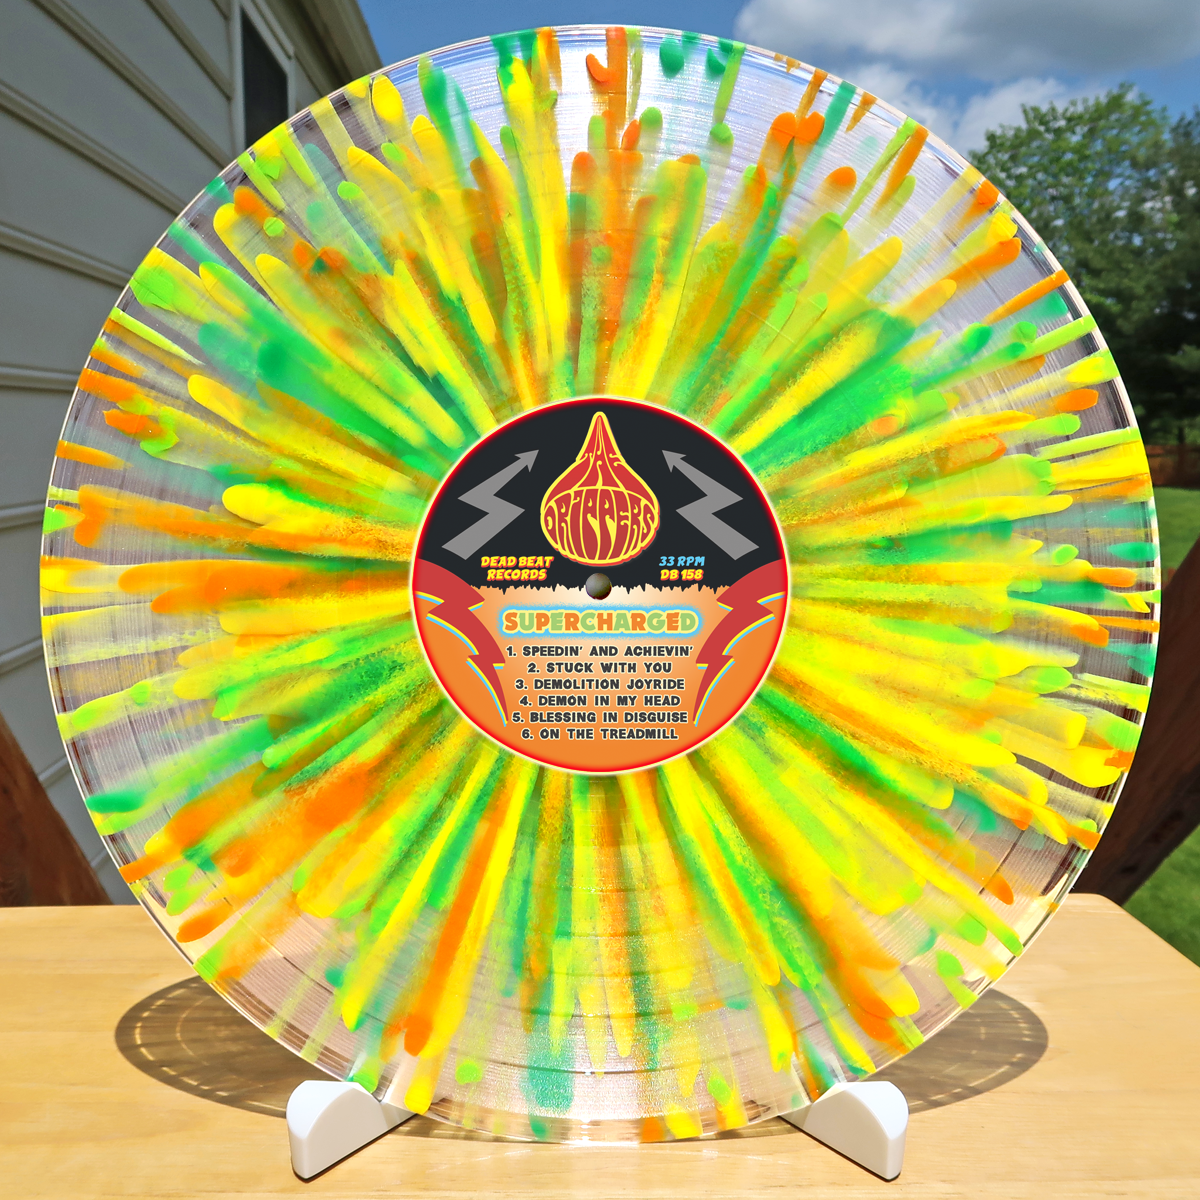 Electric Frankenstein / The Drippers-  'Supercharged' Split LP ~SILVER BUNDLE LTD TO 50 W/ EF PIN, DRIPPERS PIN + SPLAT WAX!